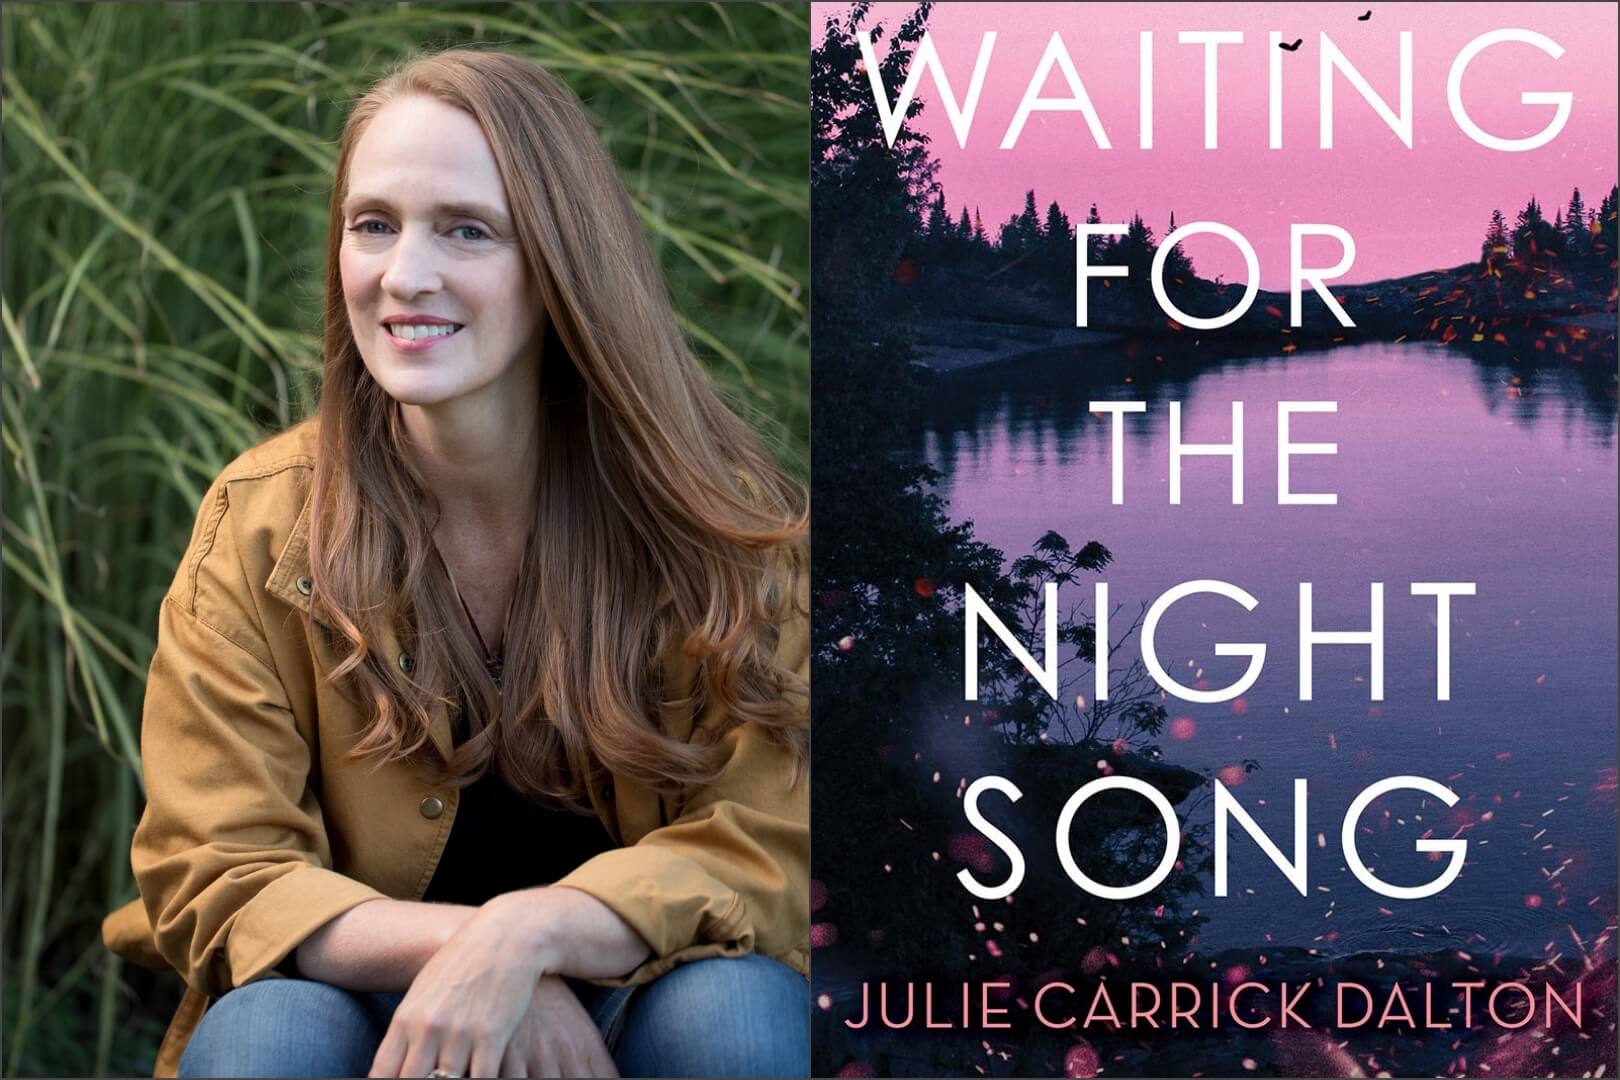 Q&A with Julie Carrick Dalton, Author of Waiting for the Night Song